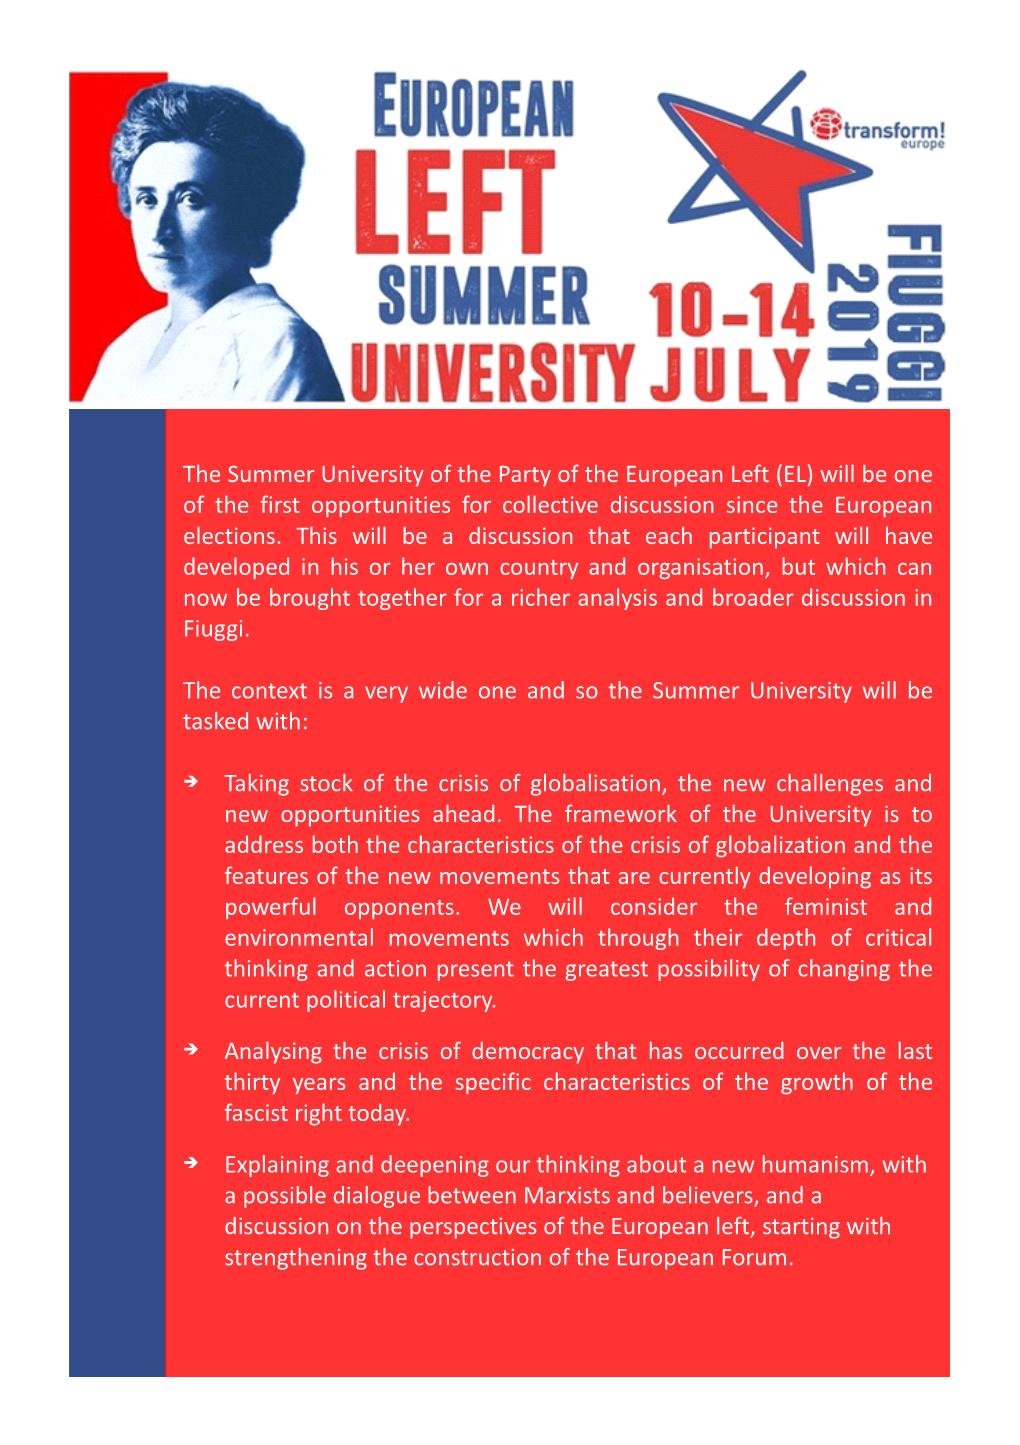 The Summer University of the Party of the European Left (EL) Will Be One of the First Opportunities for Collective Discussion Since the European Elections